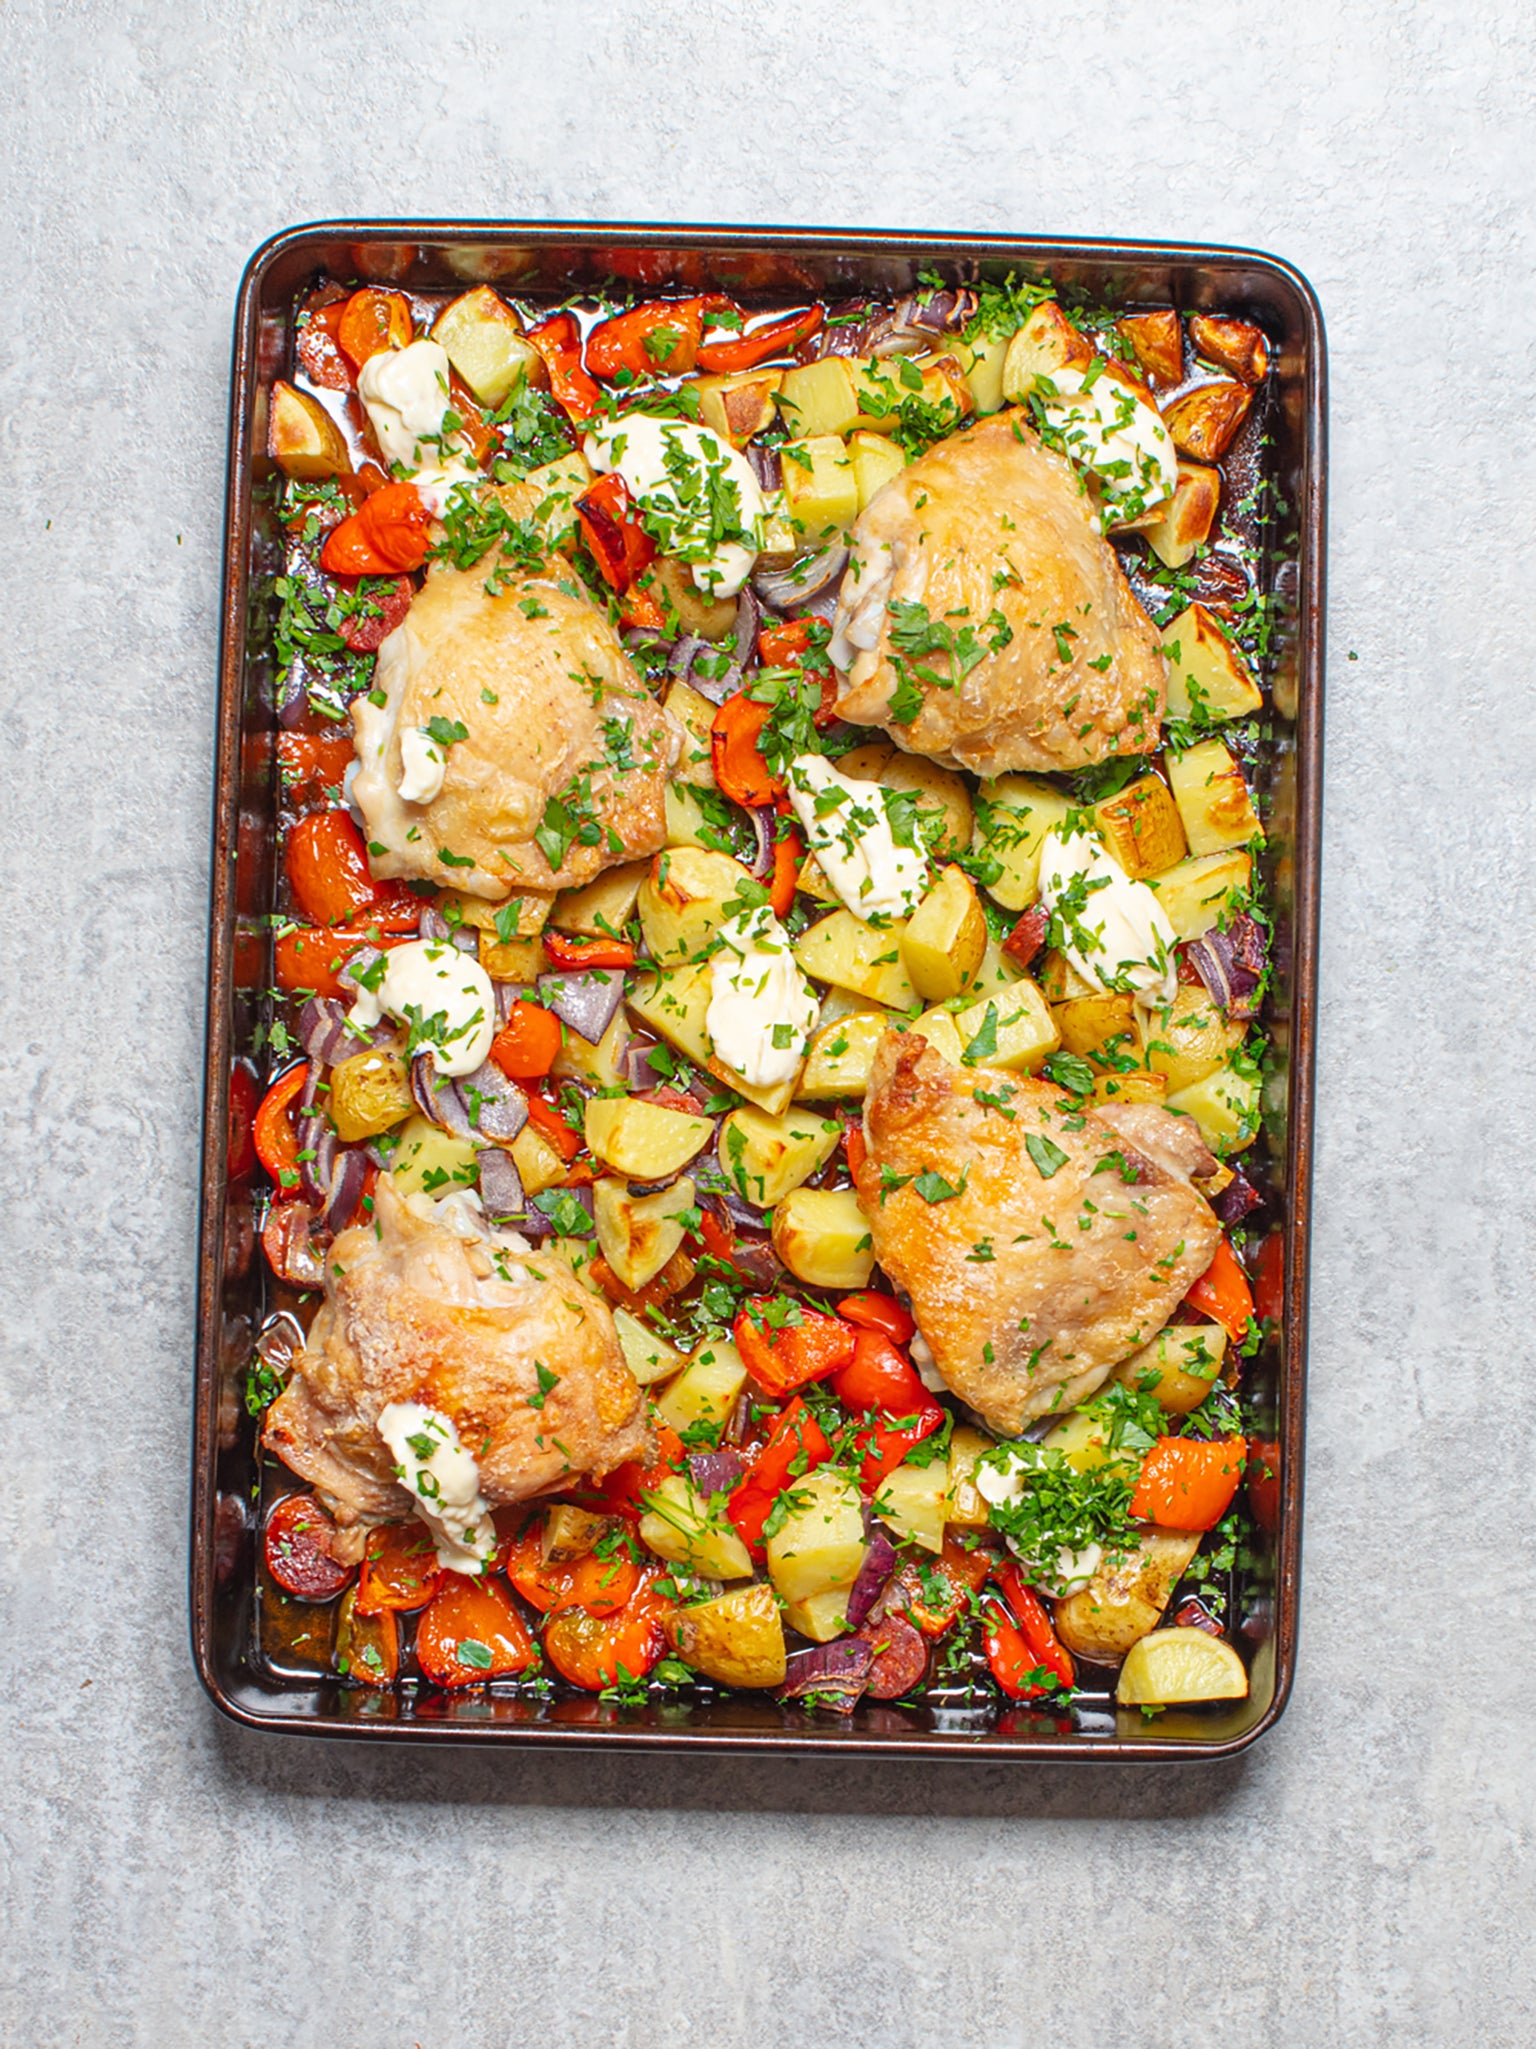 A vibrant and hearty traybake featuring chicken, chorizo and red peppers, served with a creamy garlic aioli